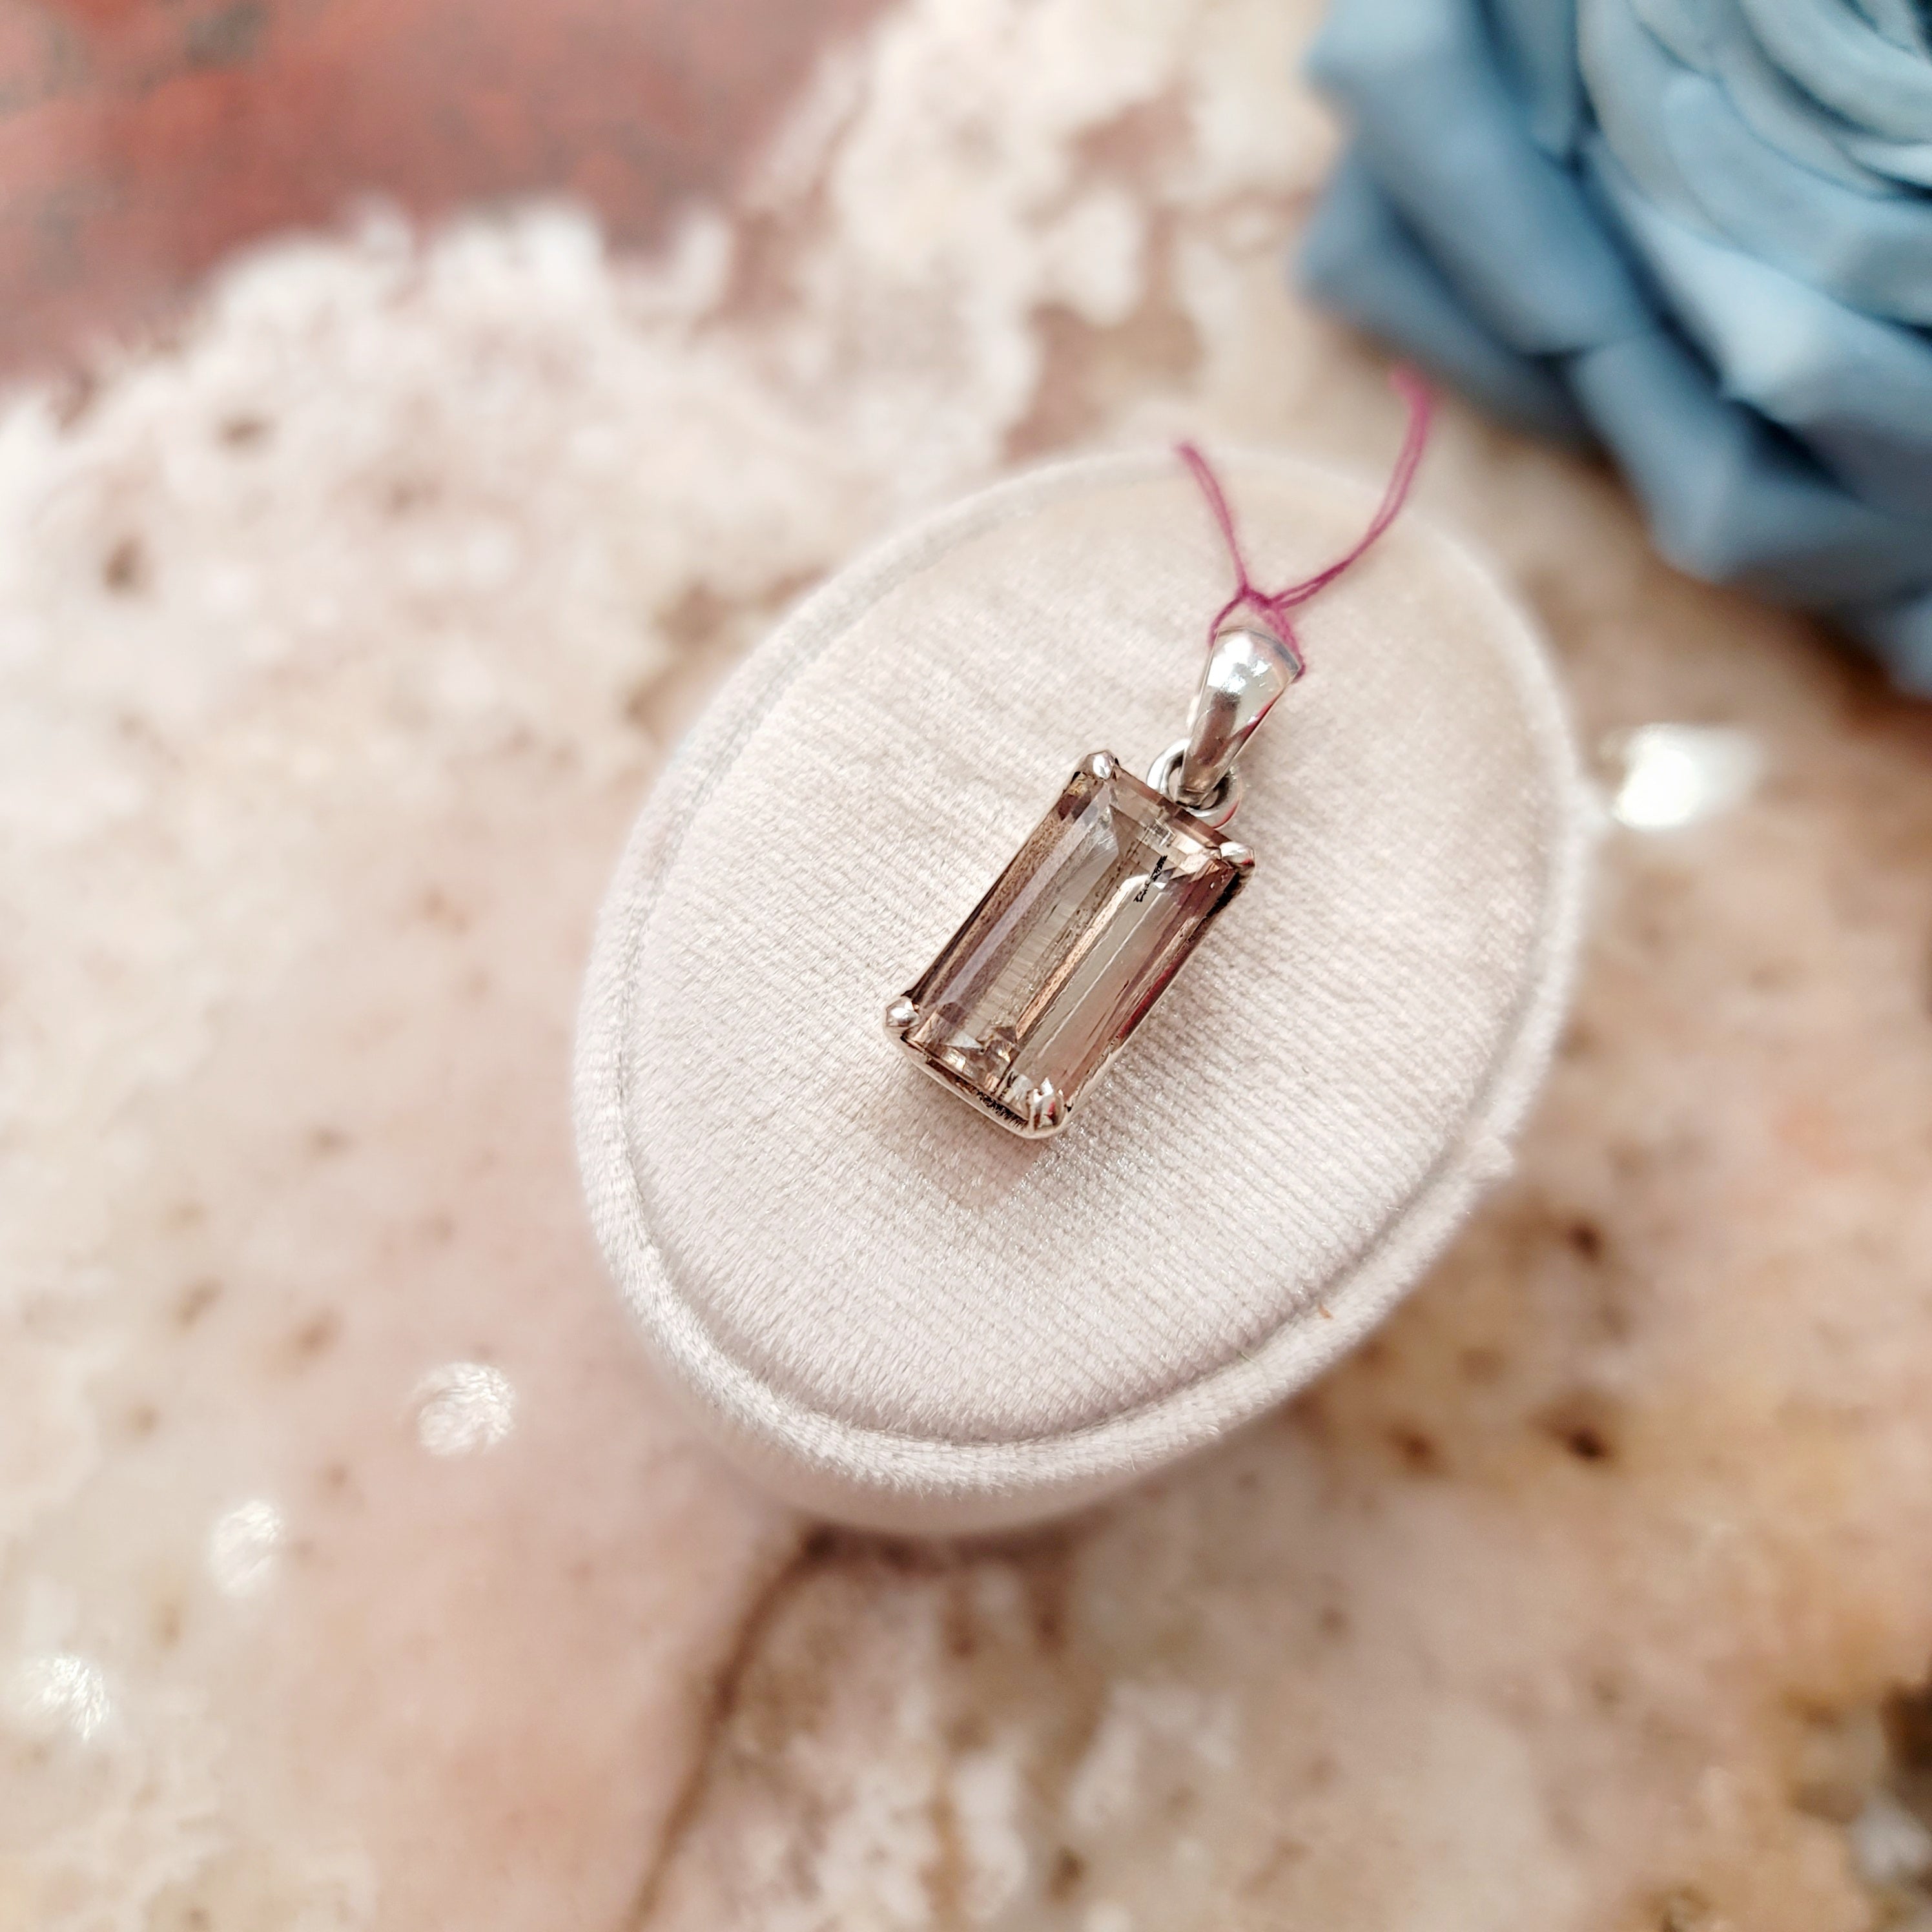 Scapolite Pendant for Manifesting and Protection